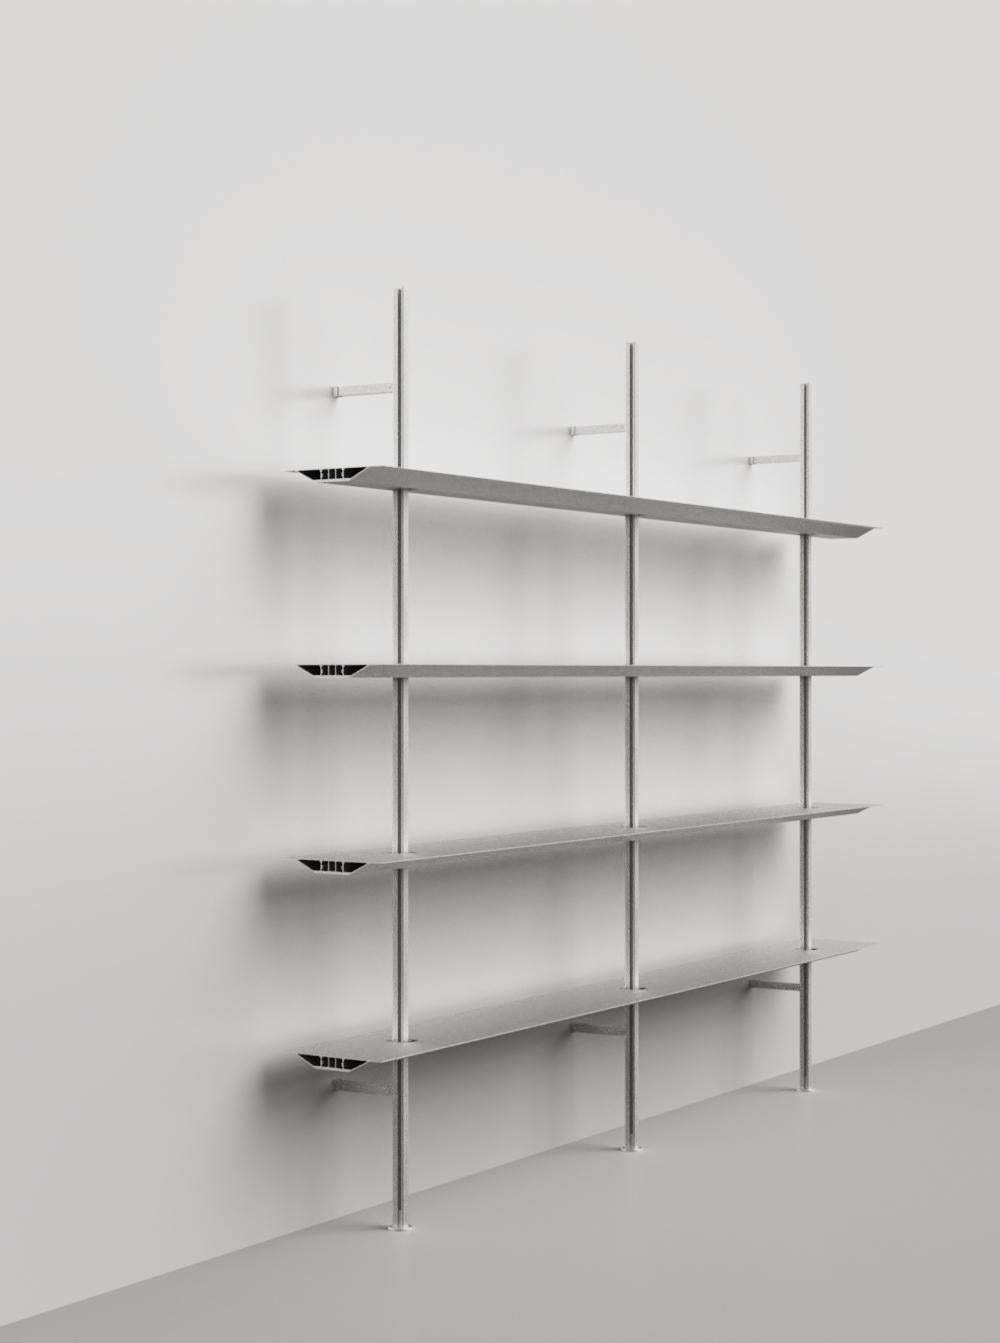 The Hypostila shelving was designed in 1979 by Lluis Clotet and Oscar Tusquets to support important amounts of weights on minimum profiles, reaching an infinity of lengths and planifications. t is constructed using extruded aluminium profiles where